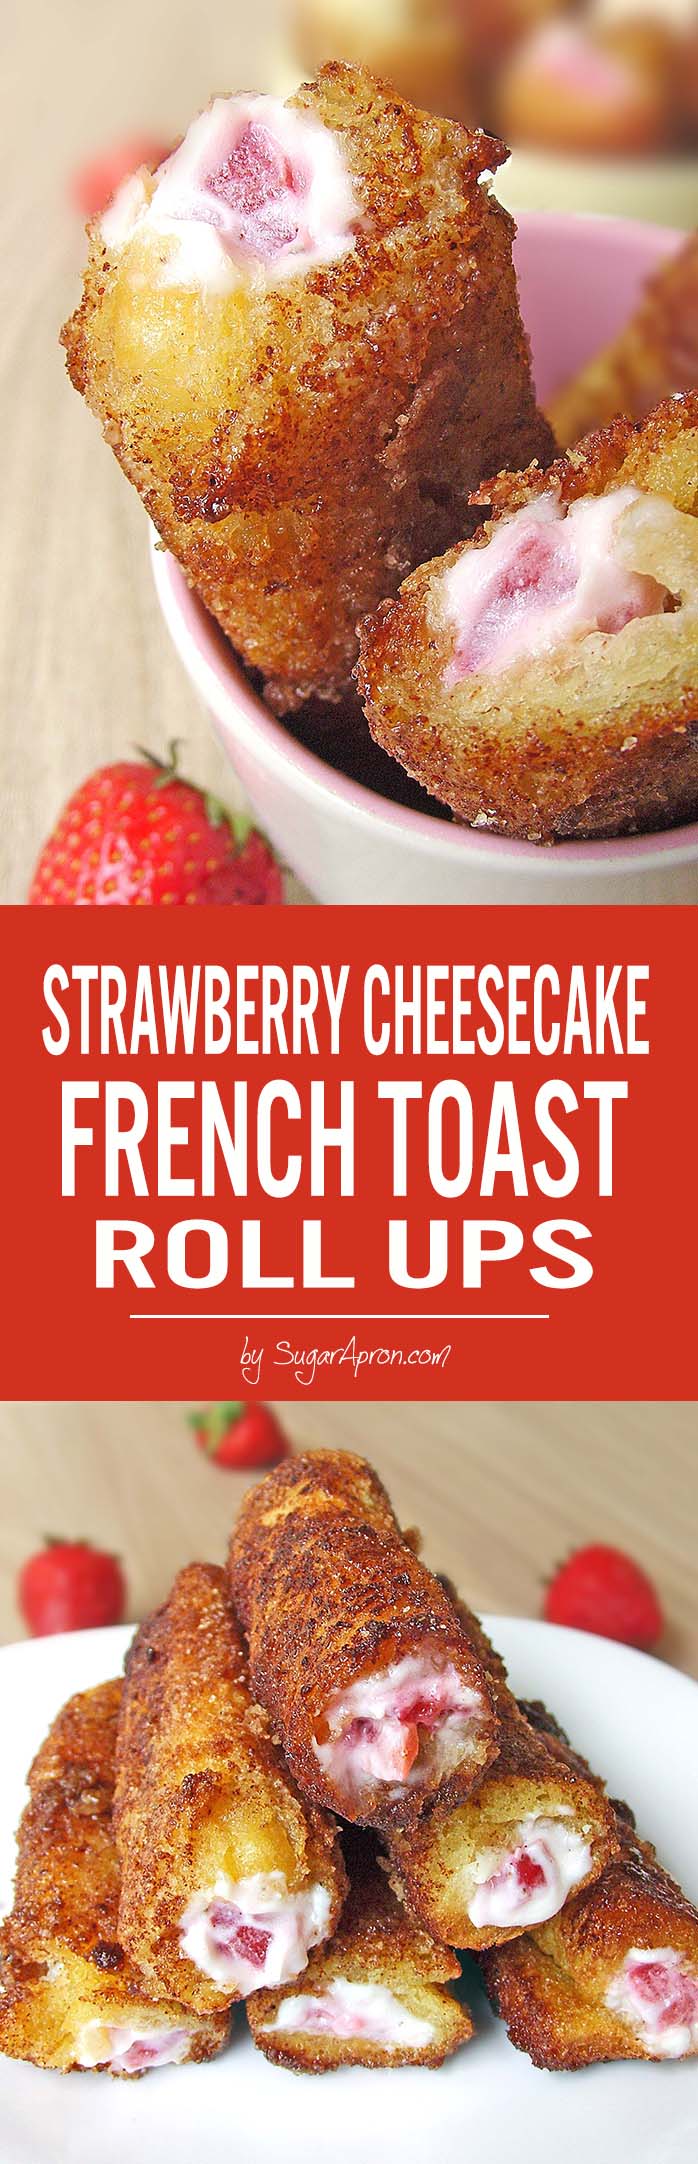 These strawberry cheesecake French toast roll-ups are actually really easy to make and you probably have all the ingredients in your home already!